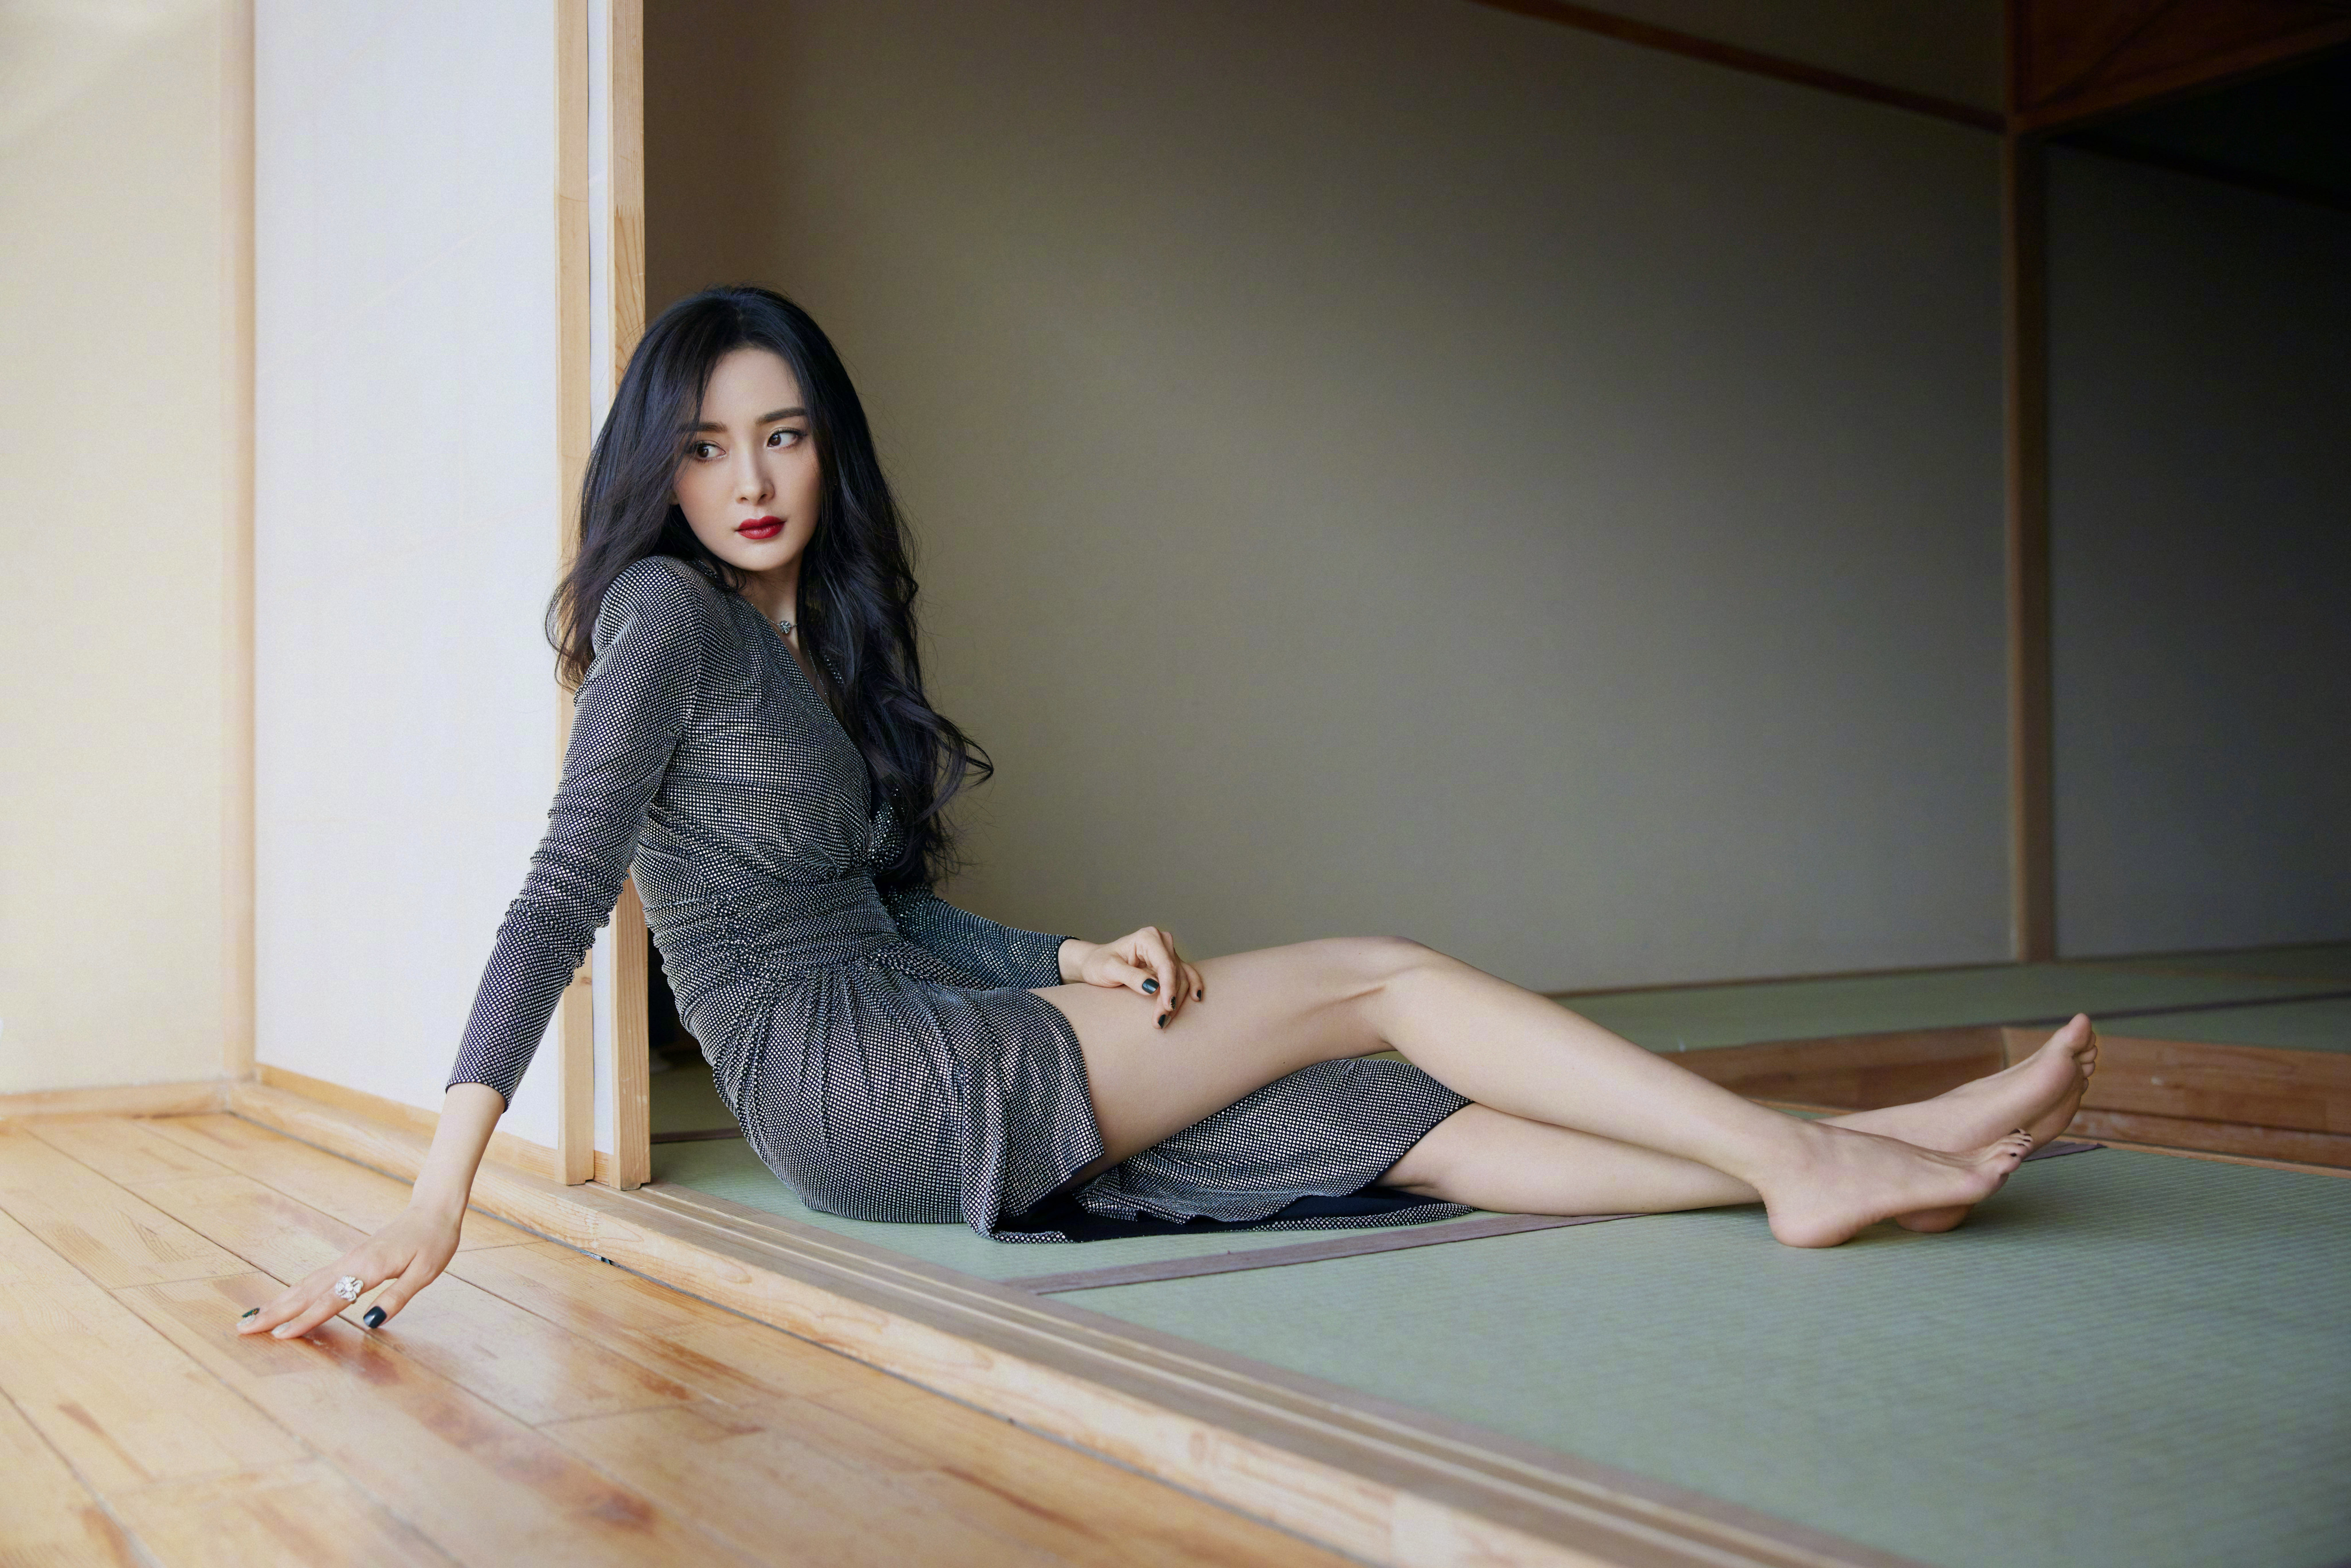 People 8192x5464 Chinese women Chinese women model Chinese model barefoot dress black hair makeup red lipstick looking away on the floor sitting women indoors painted nails legs black nails pointed toes Asian yang mi mi yang